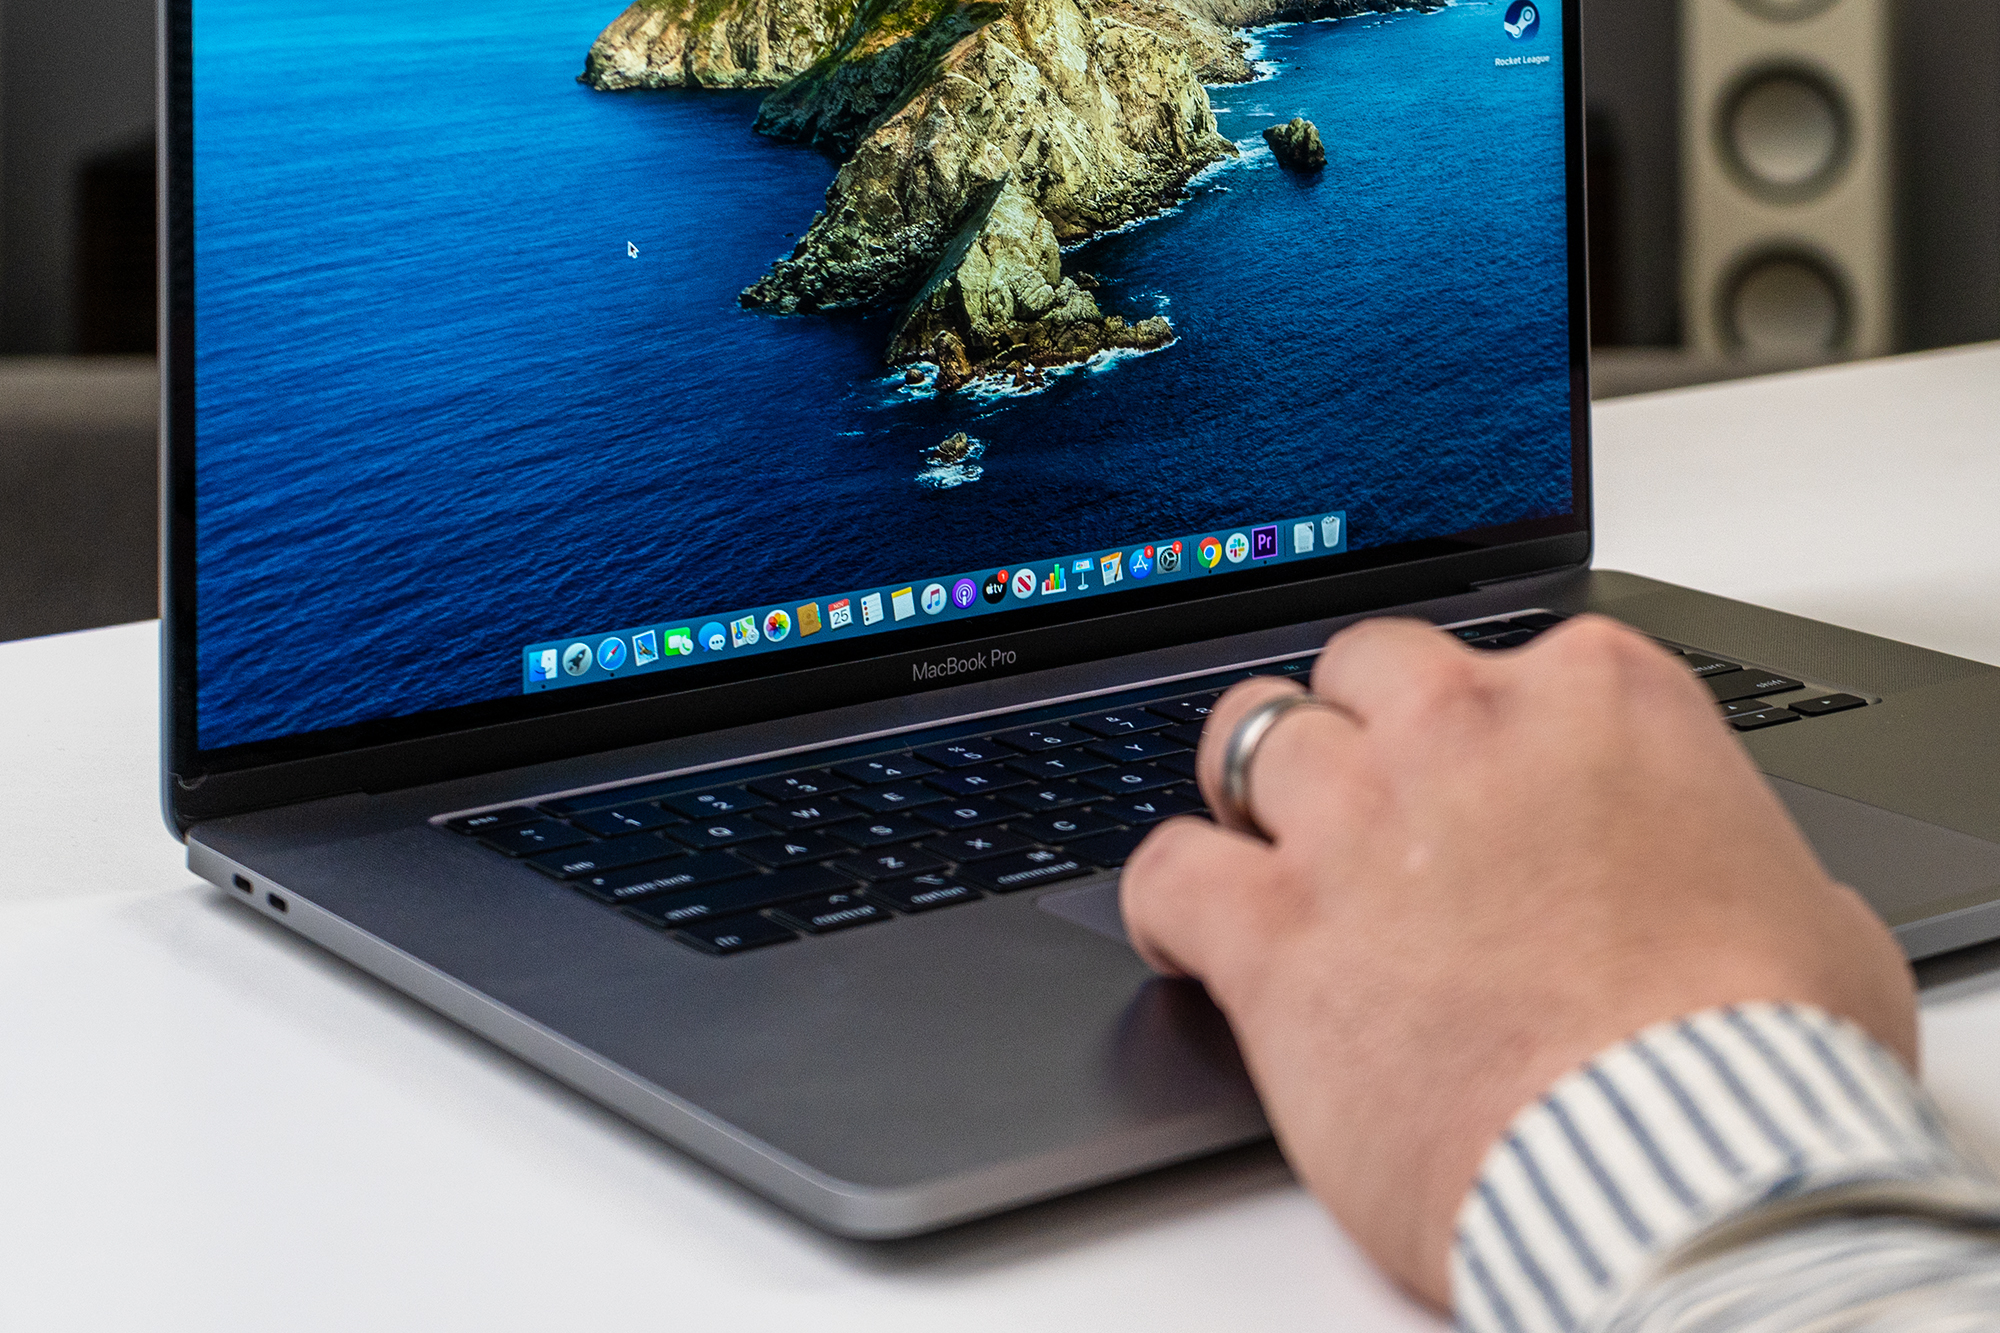 Apple's 'Force Touch' Trackpad Fools Users Into Feeling Clicks